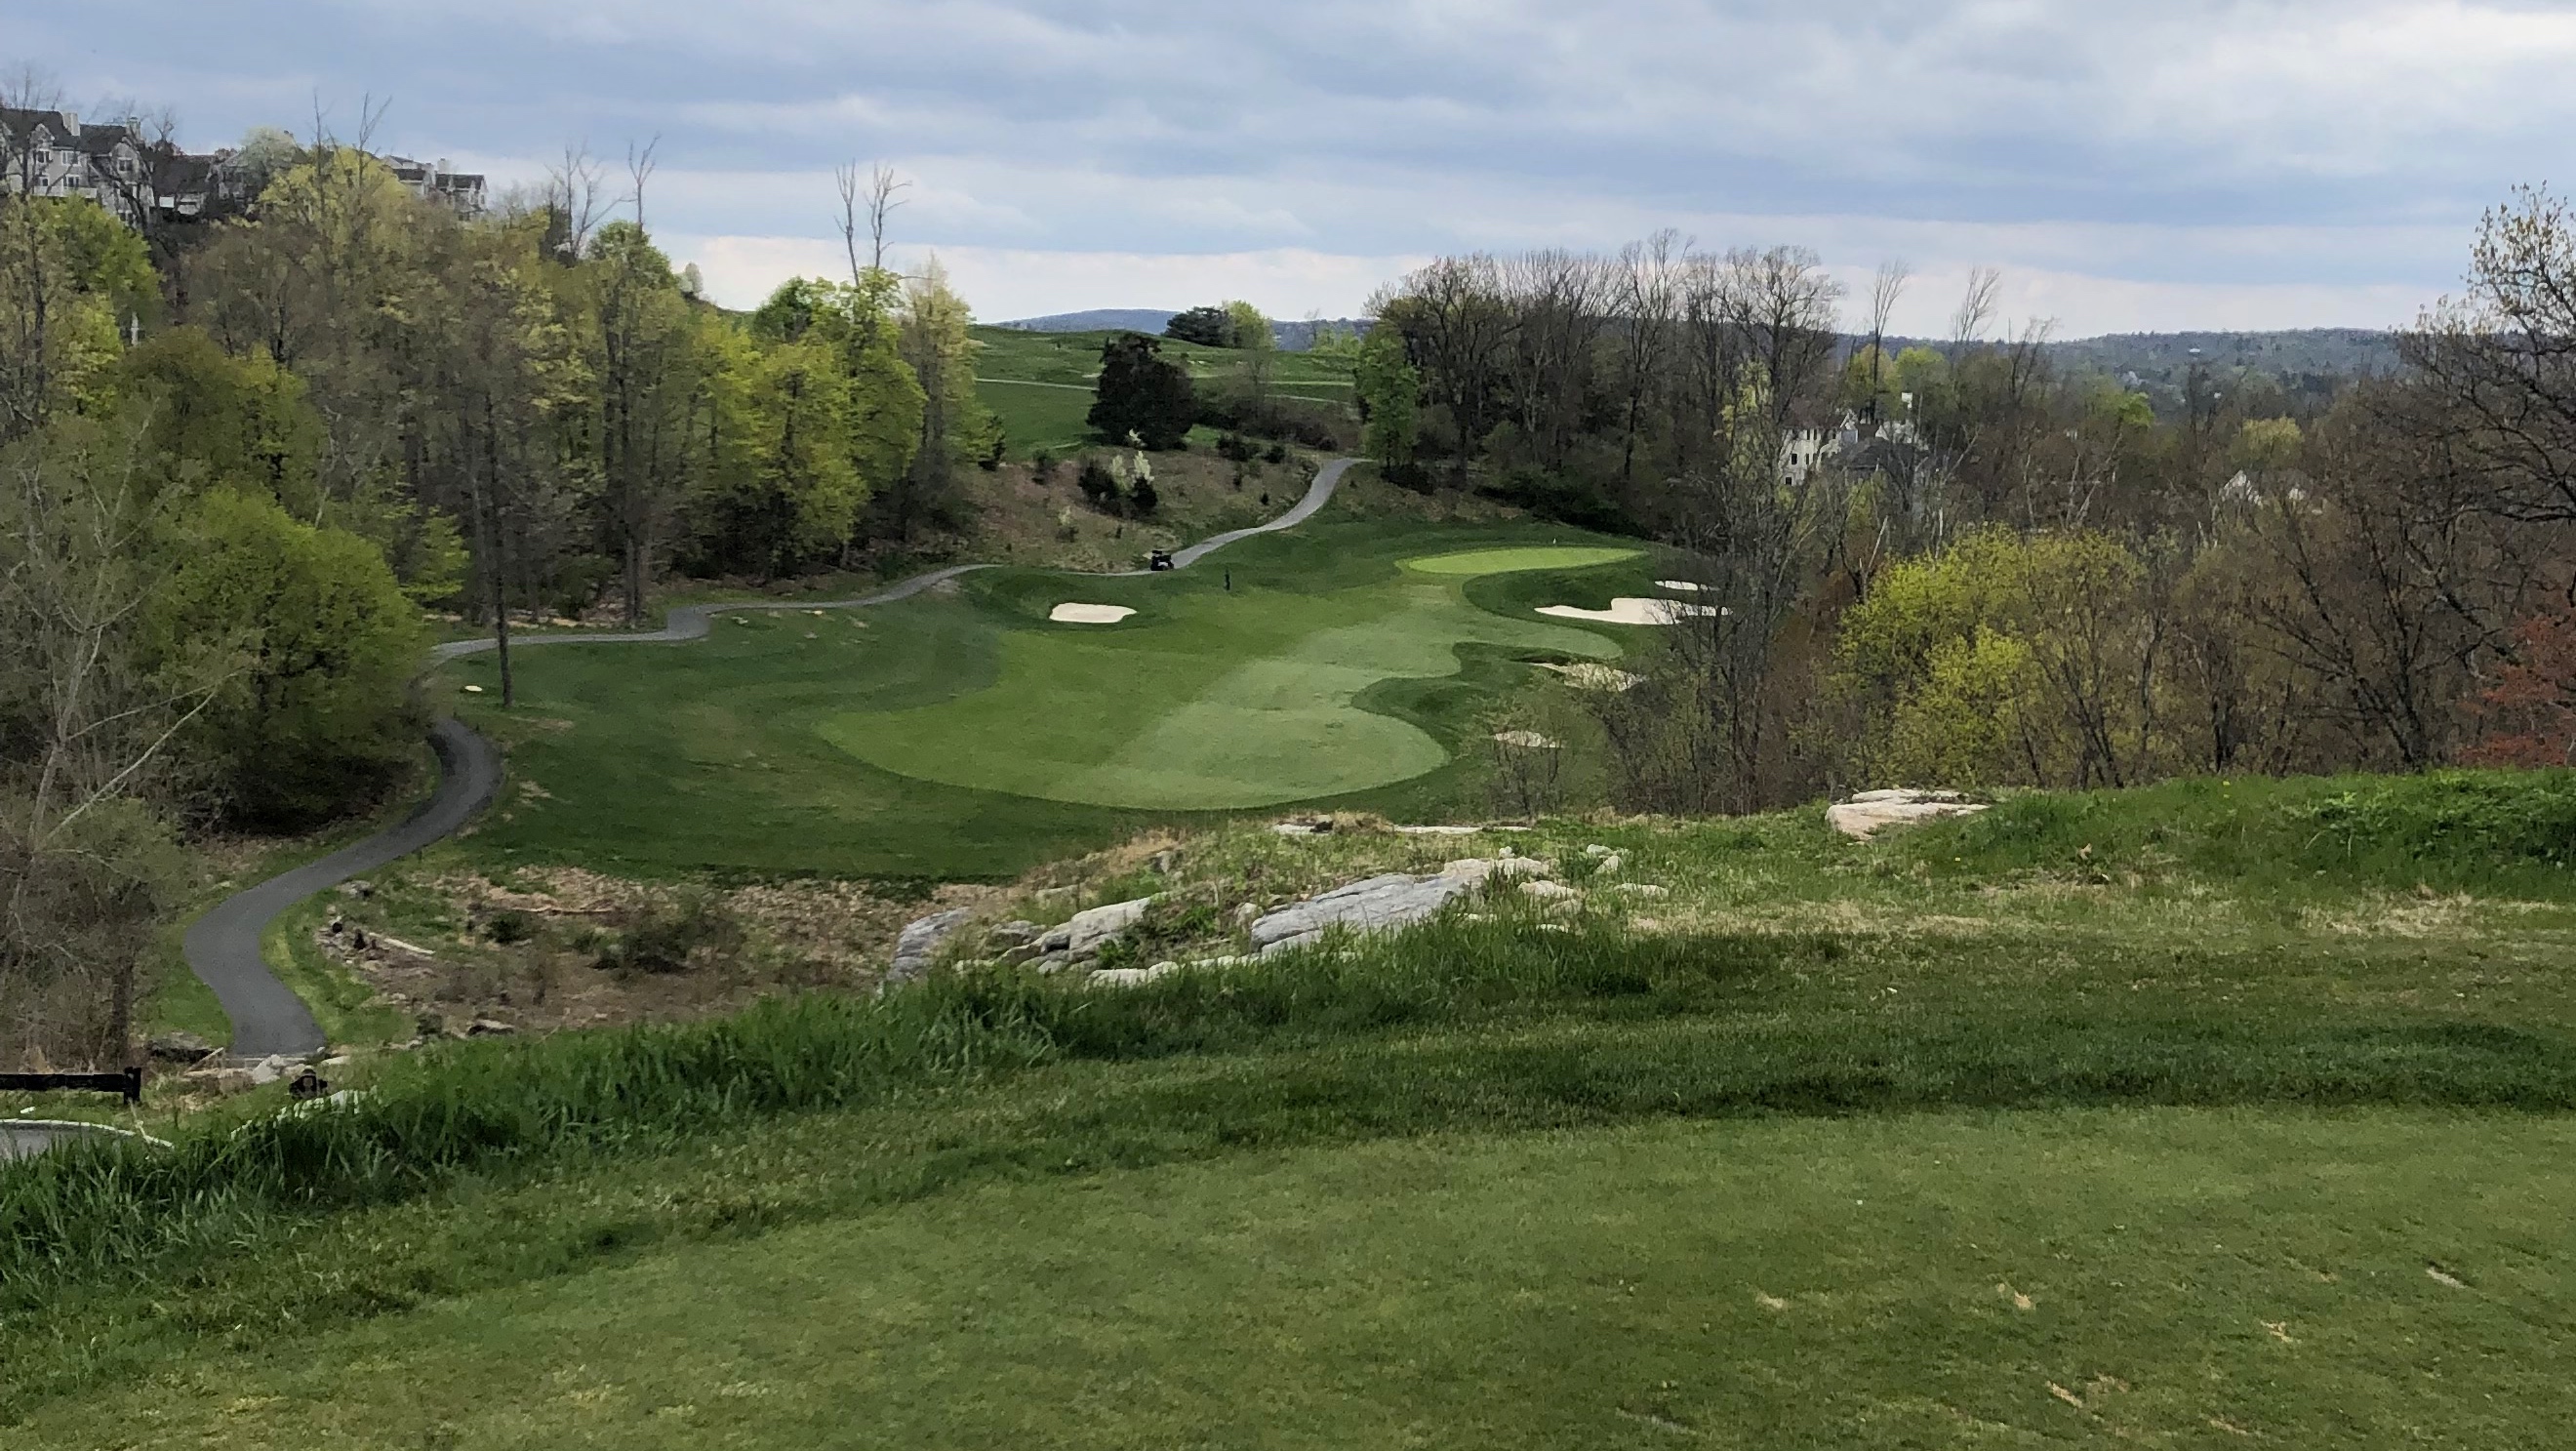 Review: The Golf Club at Mansion Ridge